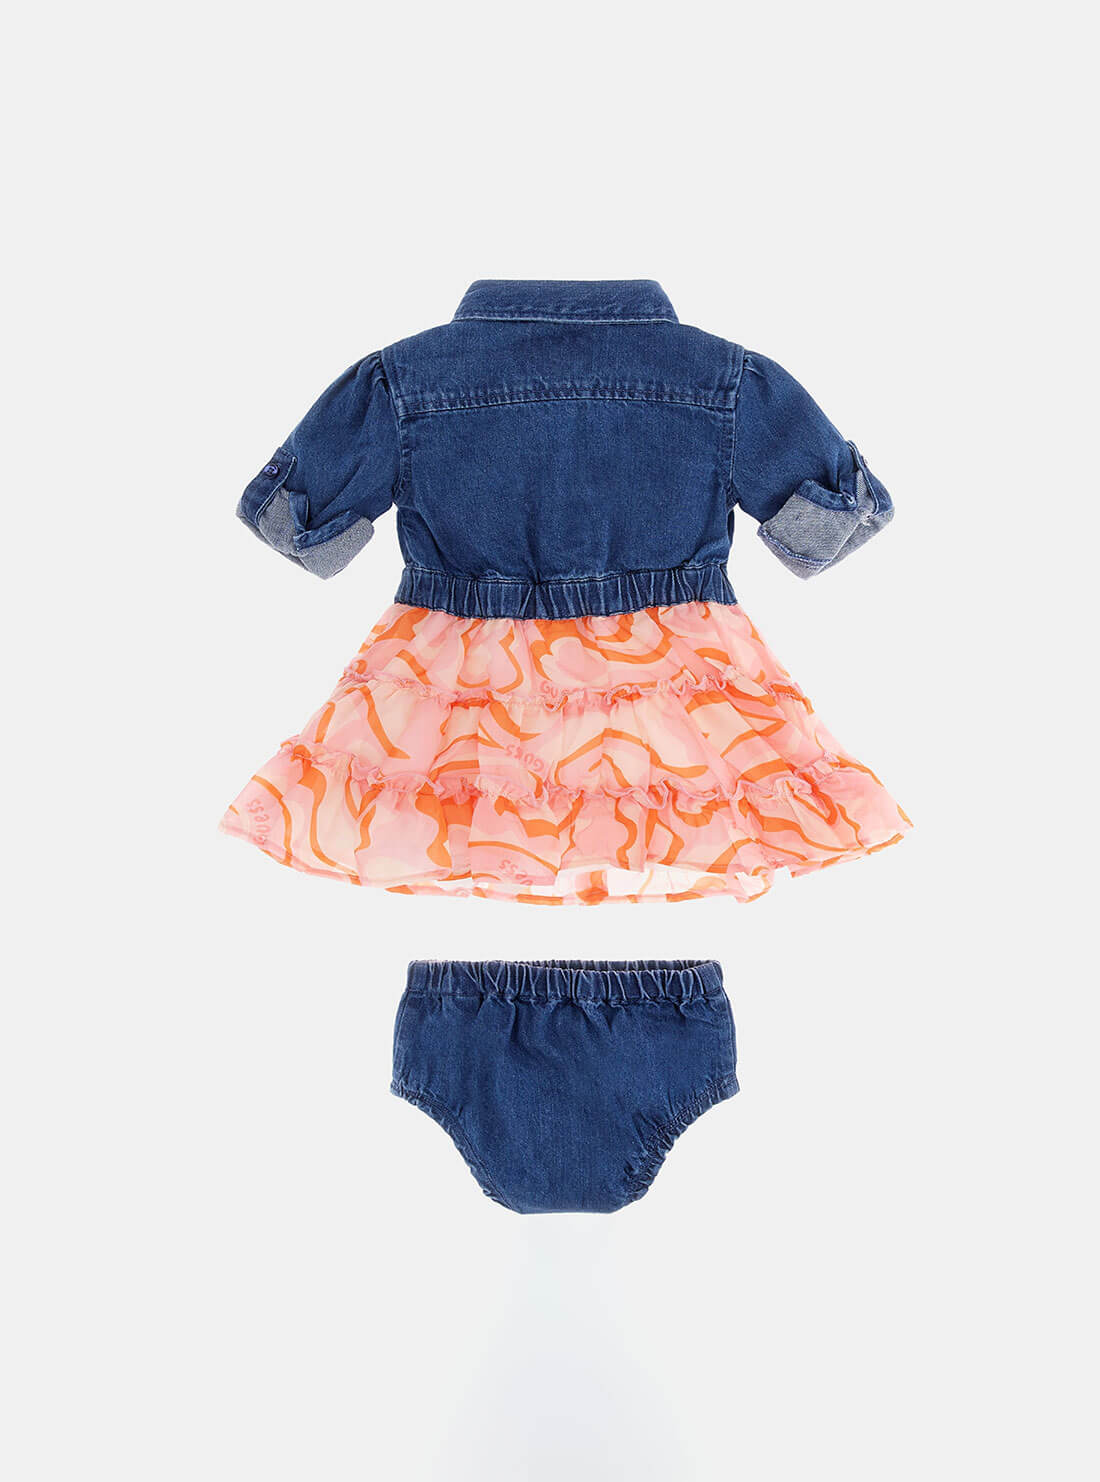 Blue Denim and Heart Print Dress with Panties Set (3-18M) | GUESS Kids | back view